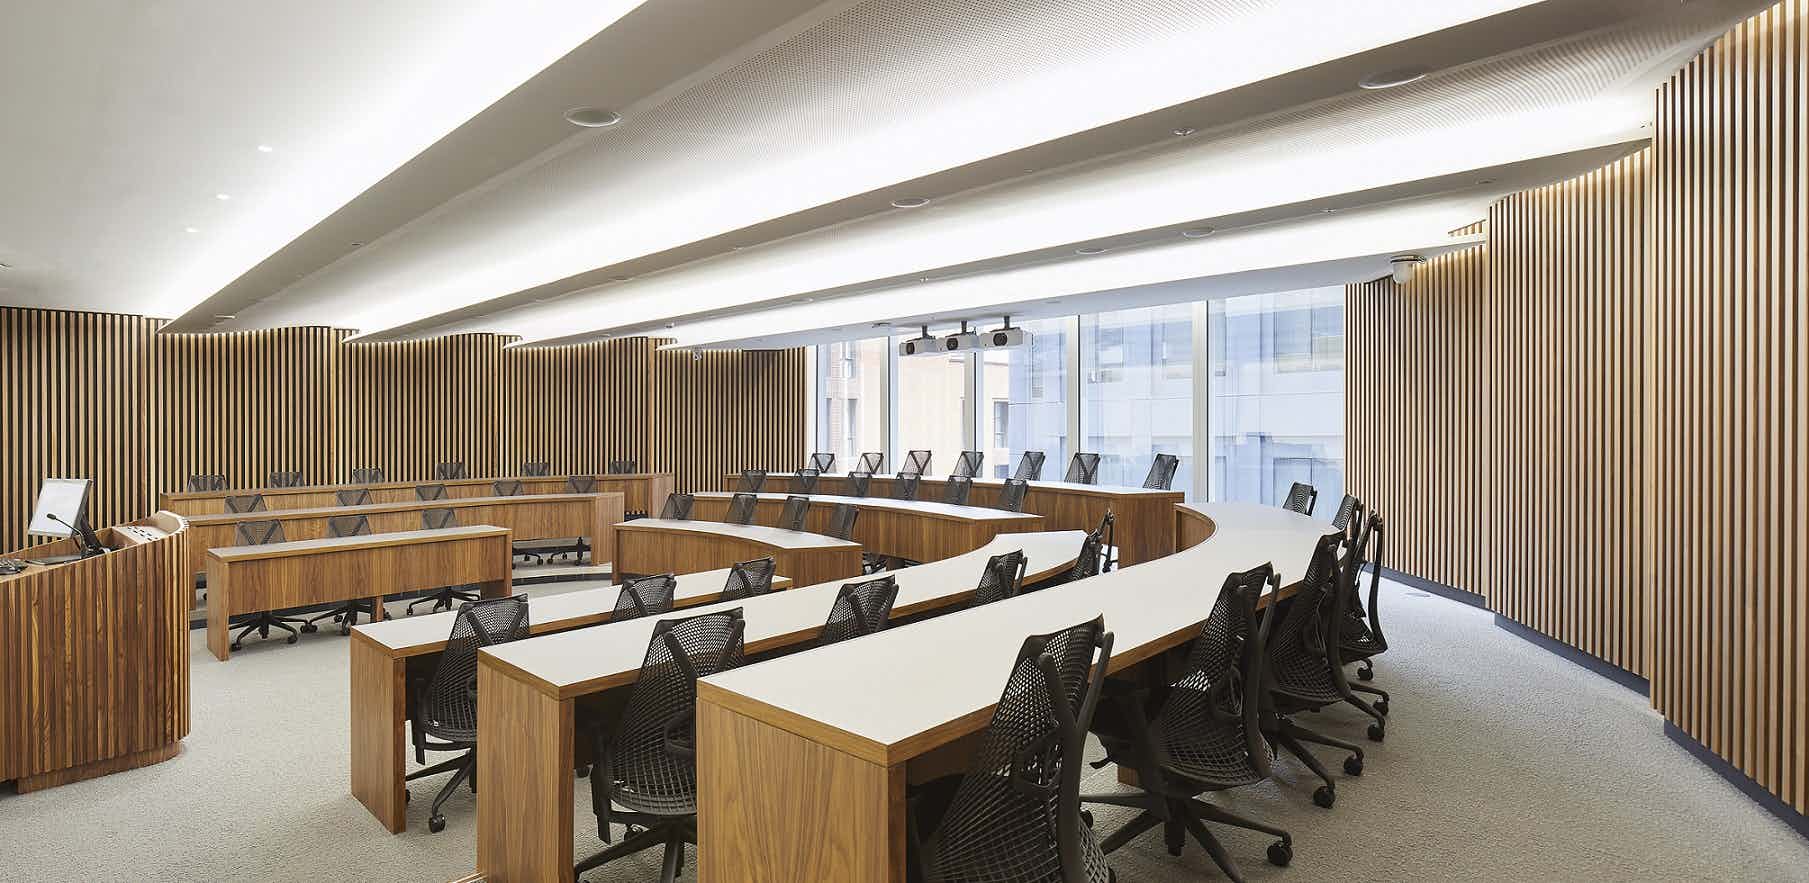 Executive Education Classroom, The University of Chicago Booth School of Business